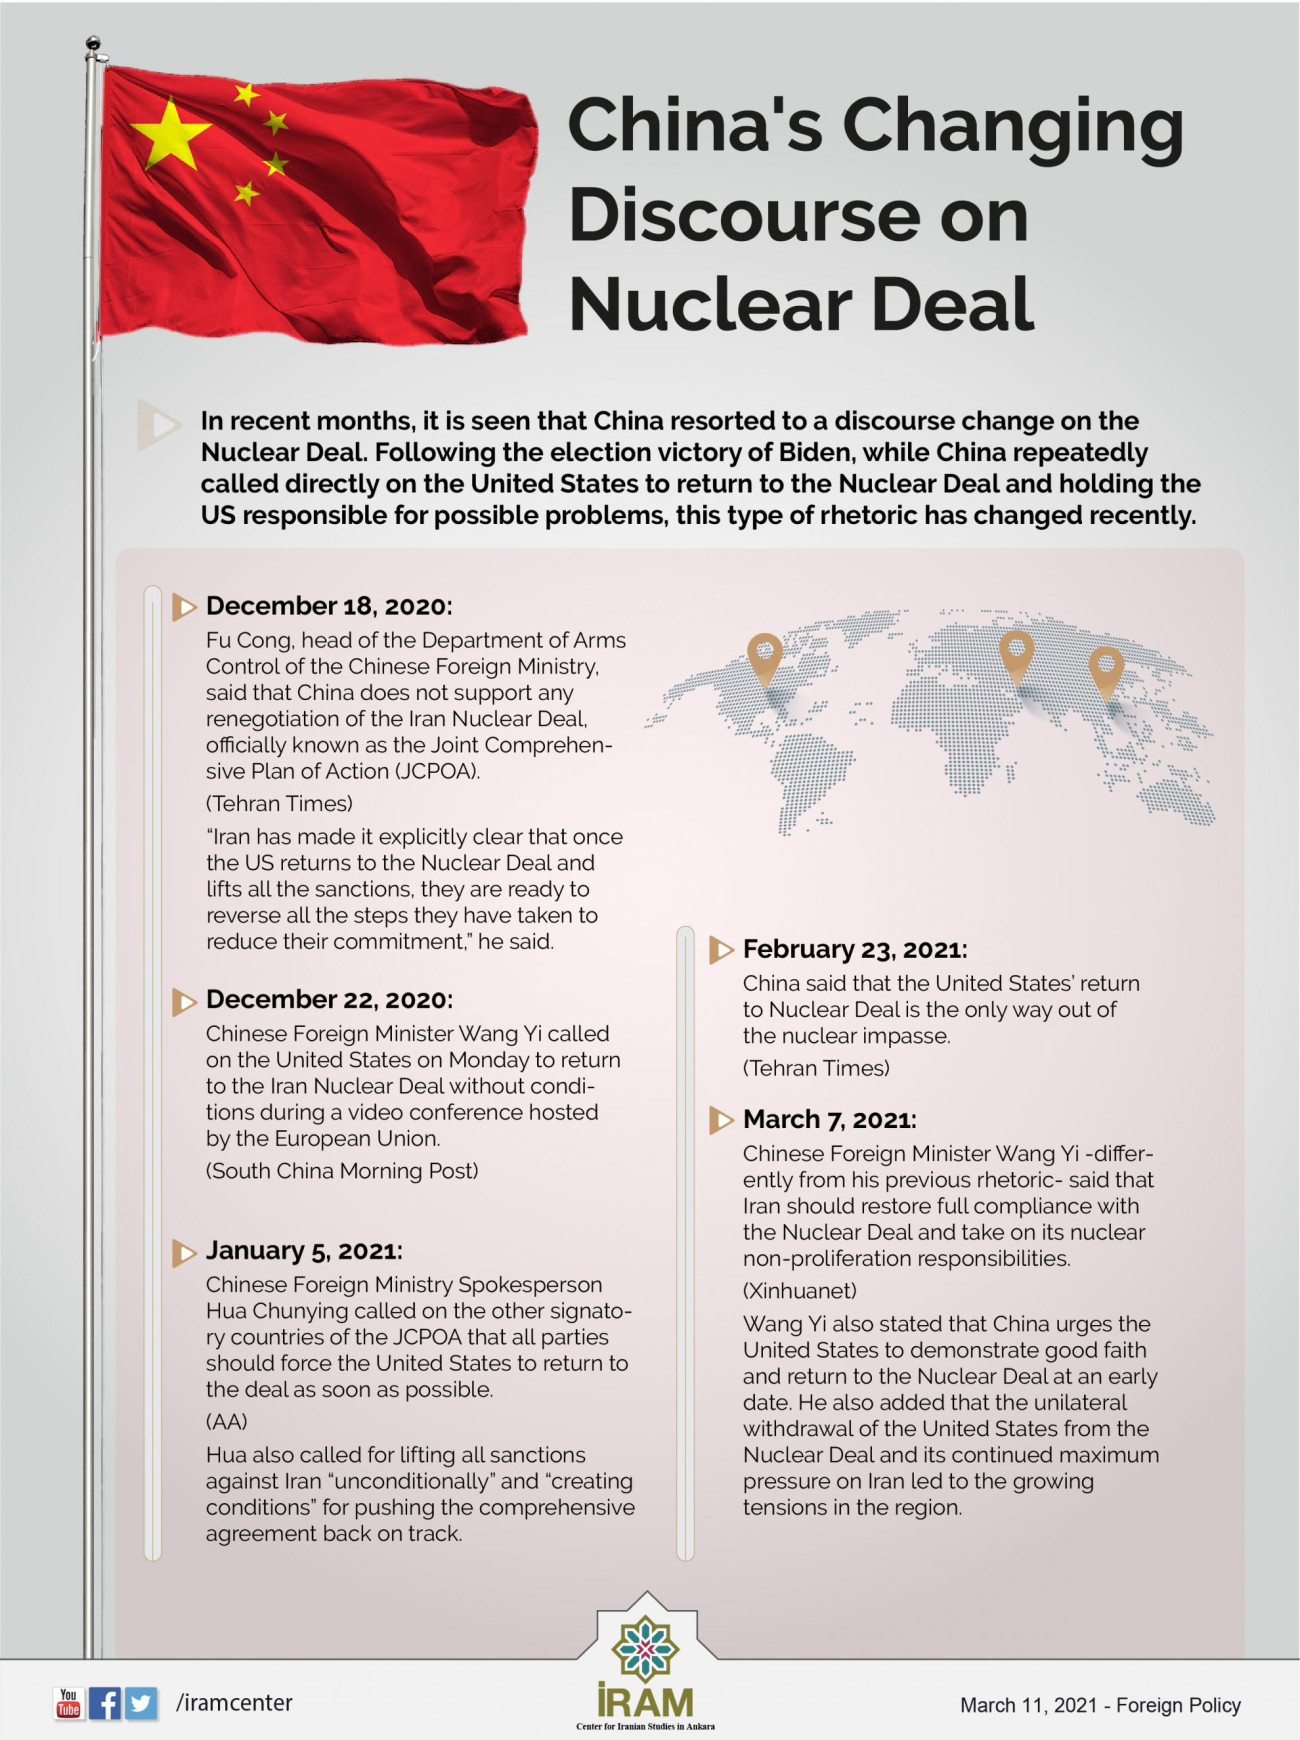 China's Changing Discourse on Nuclear Deal